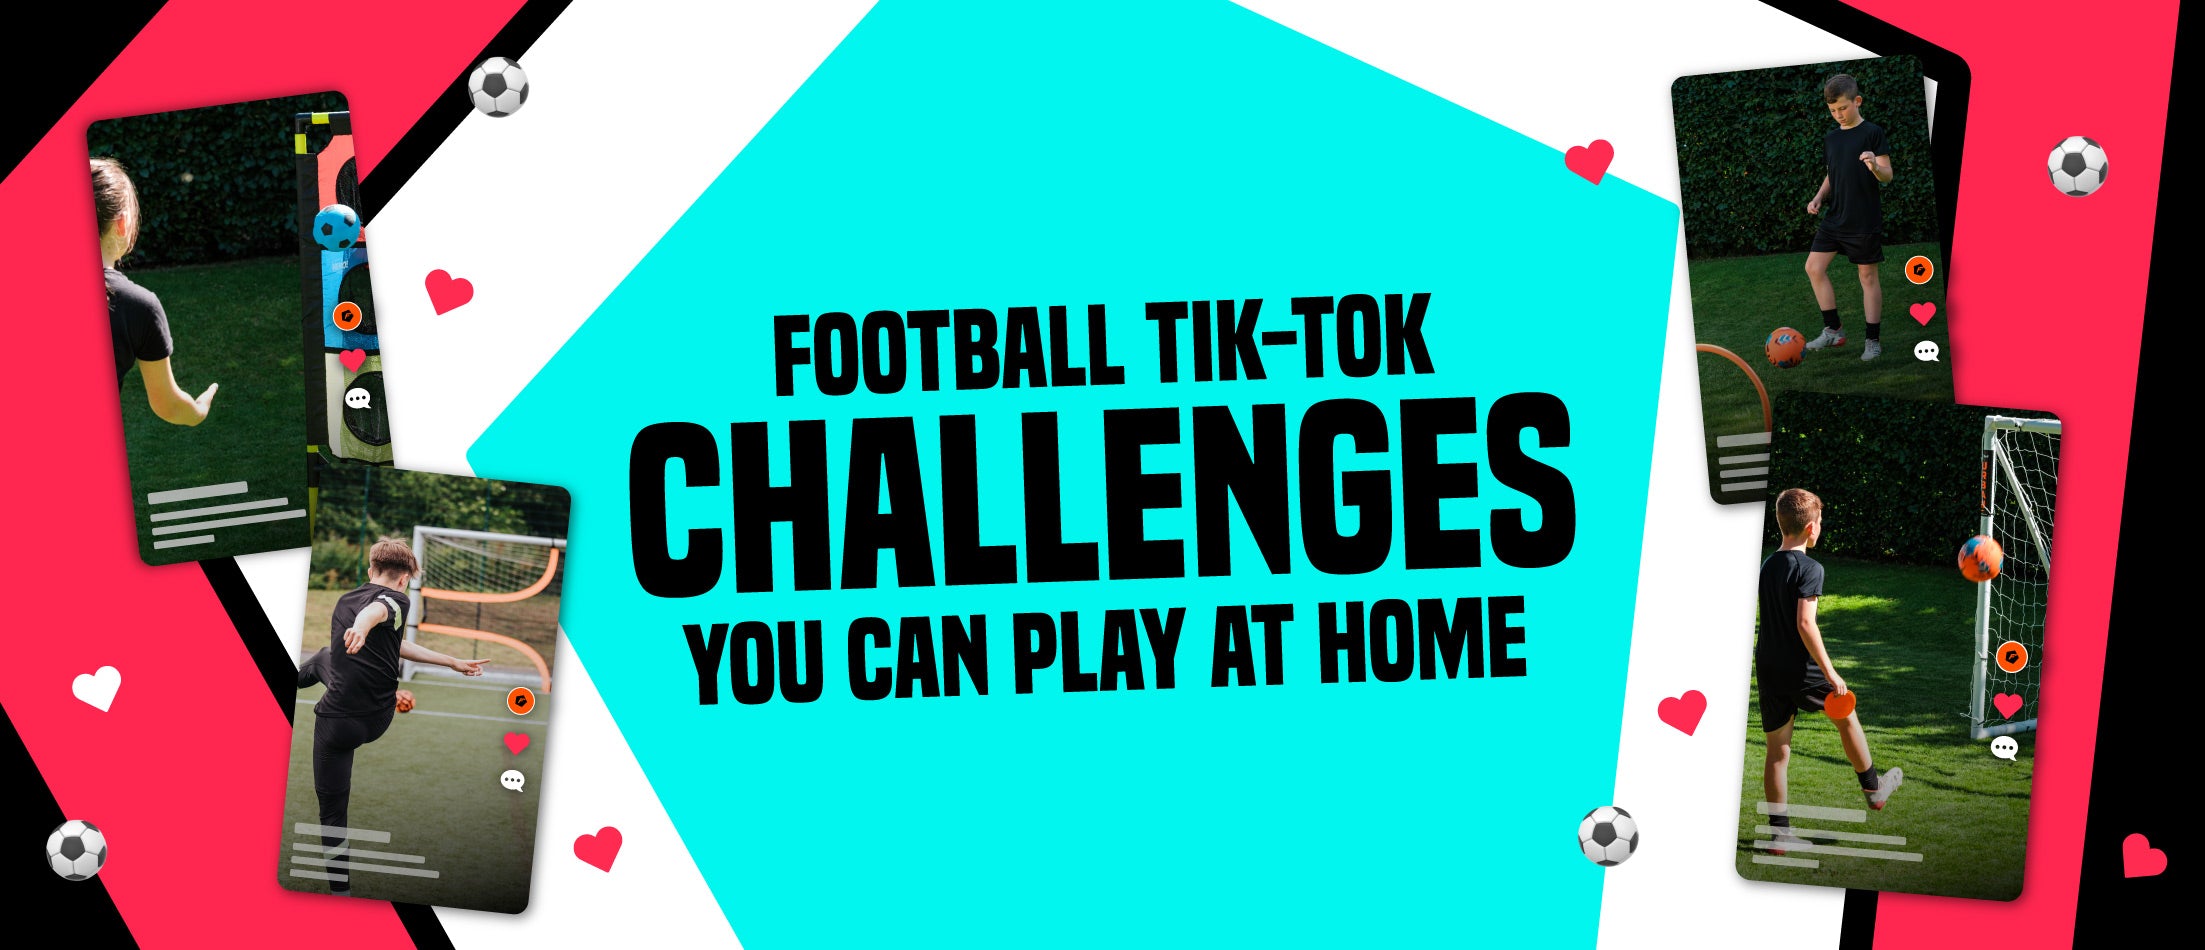 Football Tik-Tok Challenges you can play at Home